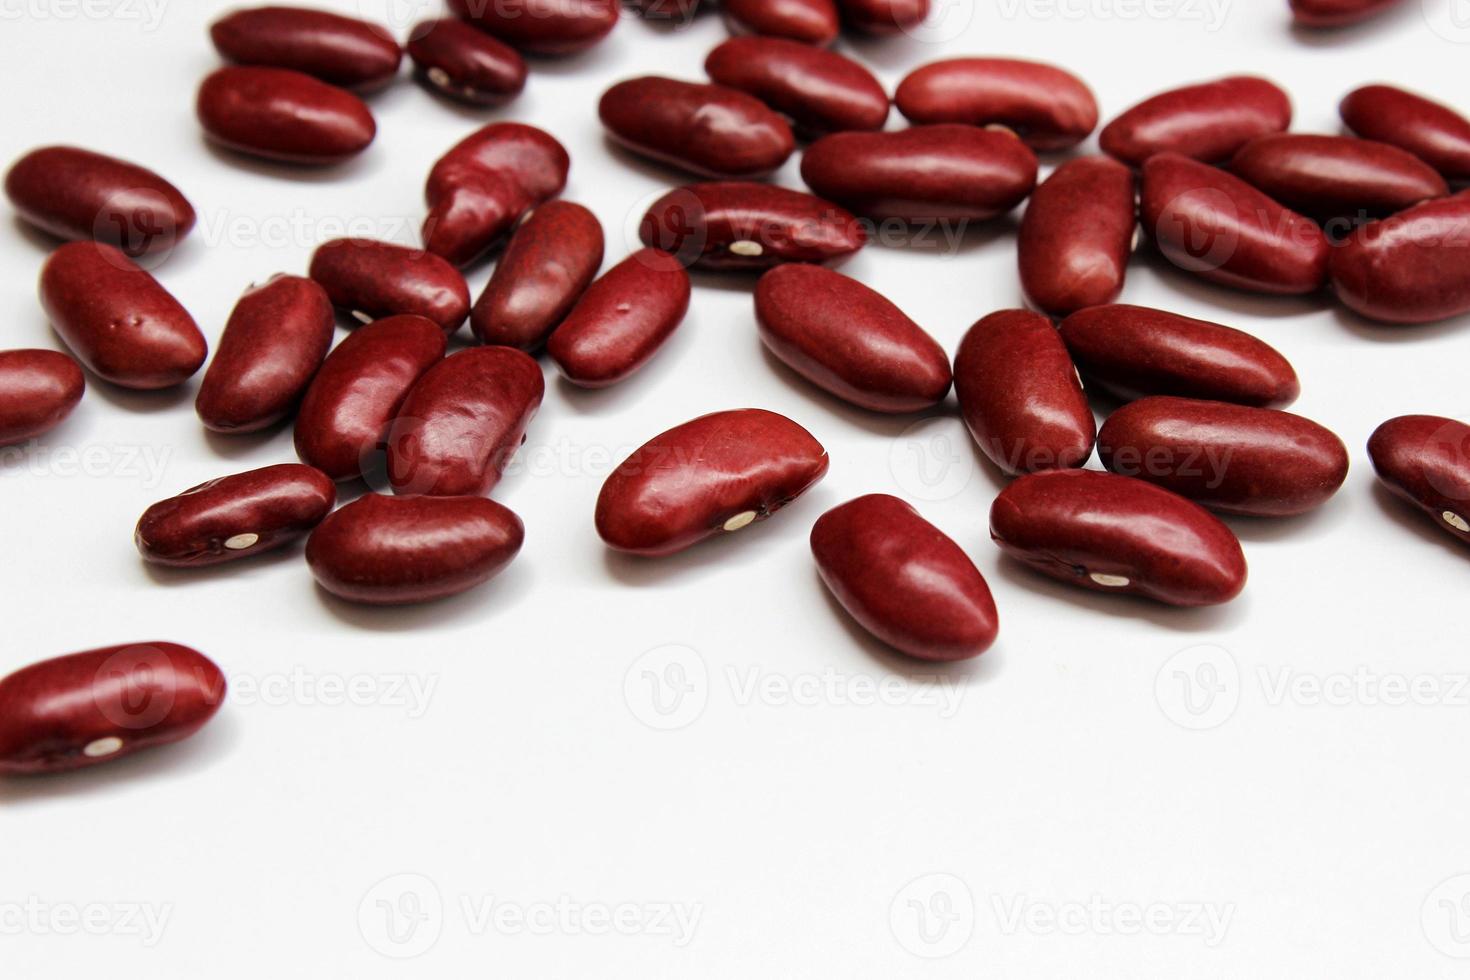 Red kidney bean isolated on the white background photo